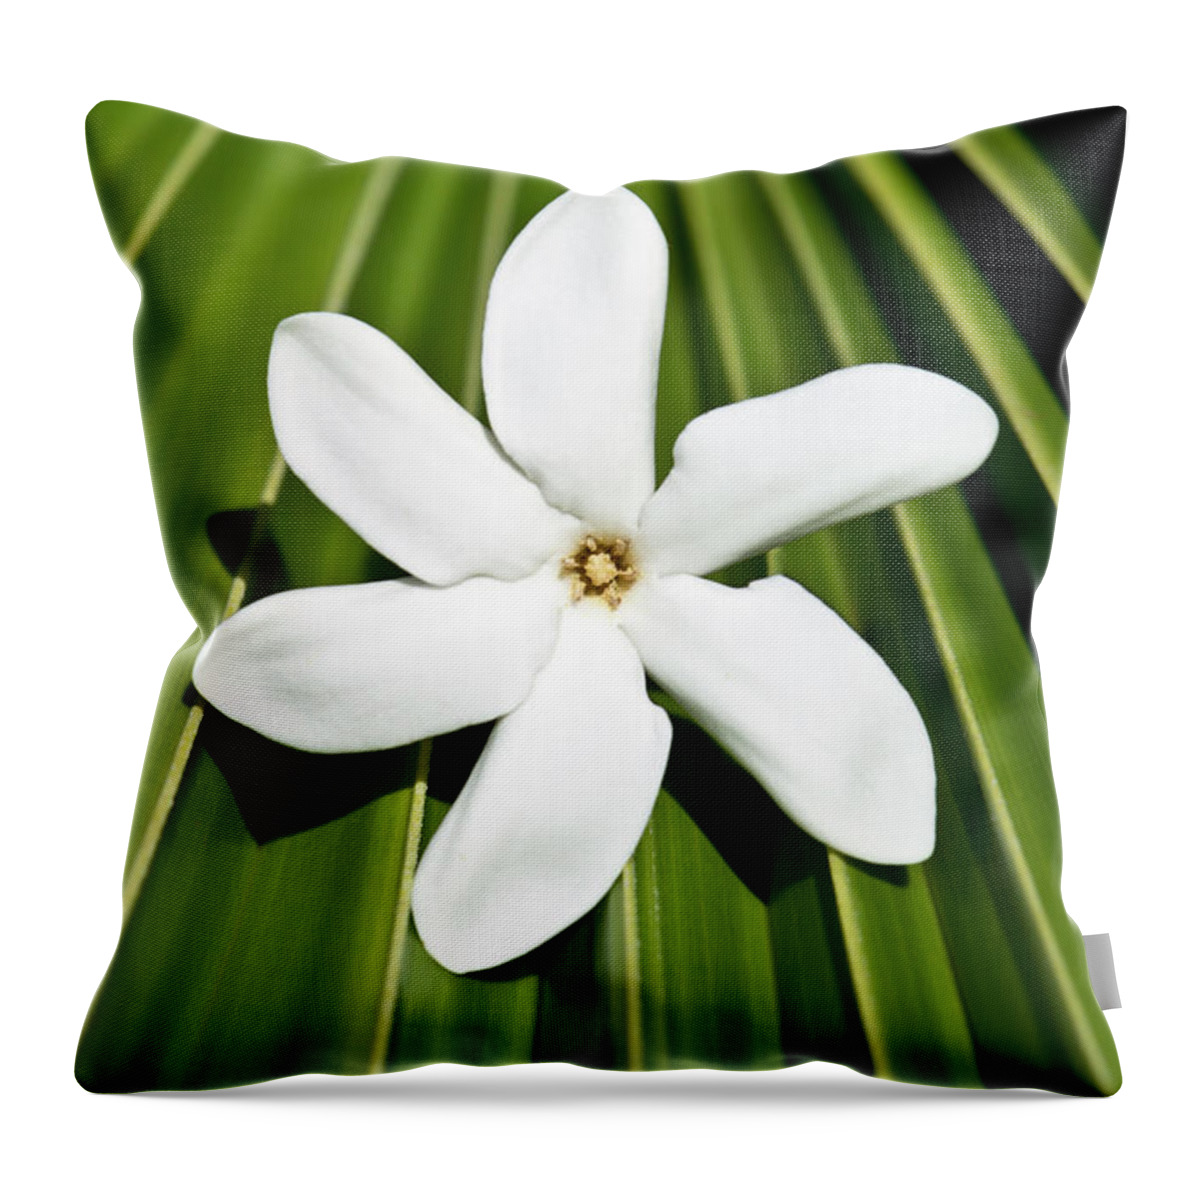 Tiare Throw Pillow featuring the photograph Tiare 2 by Tanya G Burnett